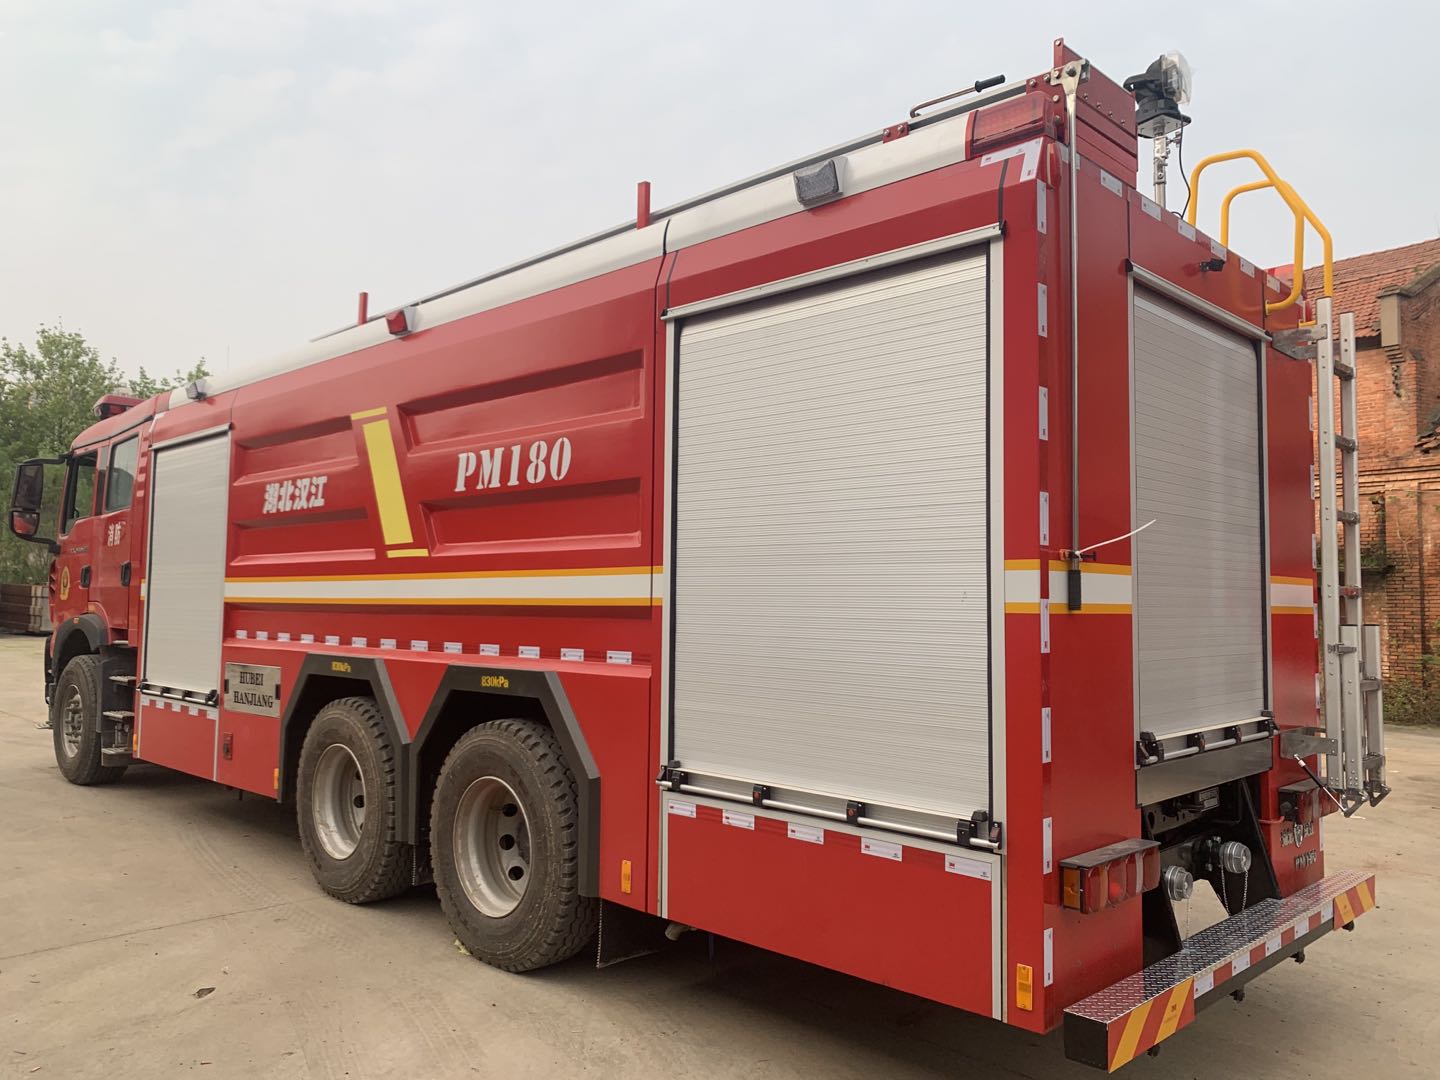 Diversified coordination of fire trucks for disaster relief